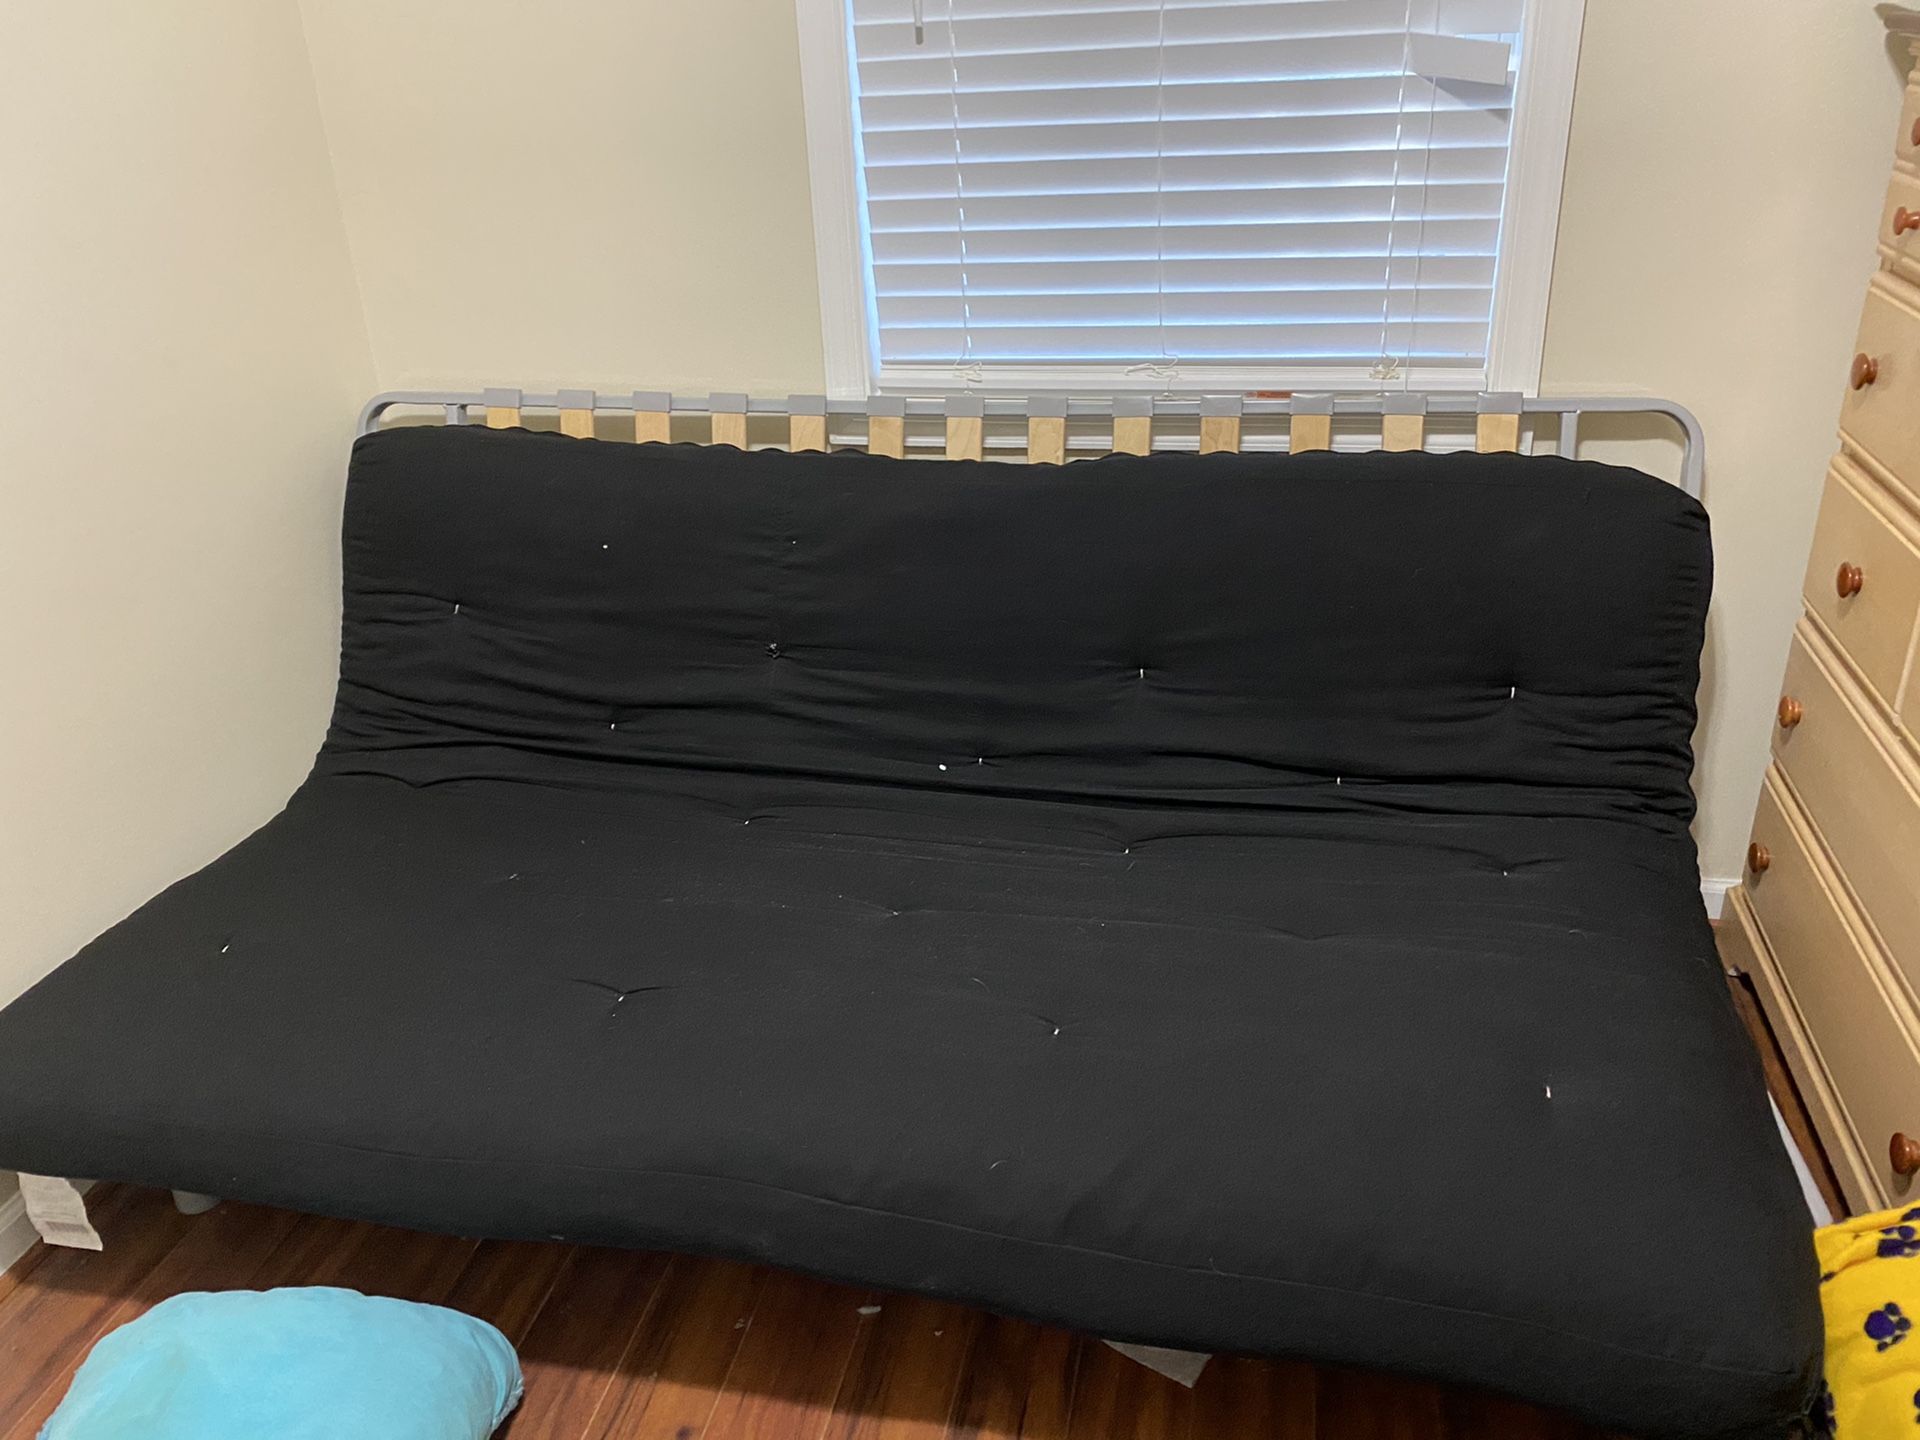 Futon for sale need gone ASAP